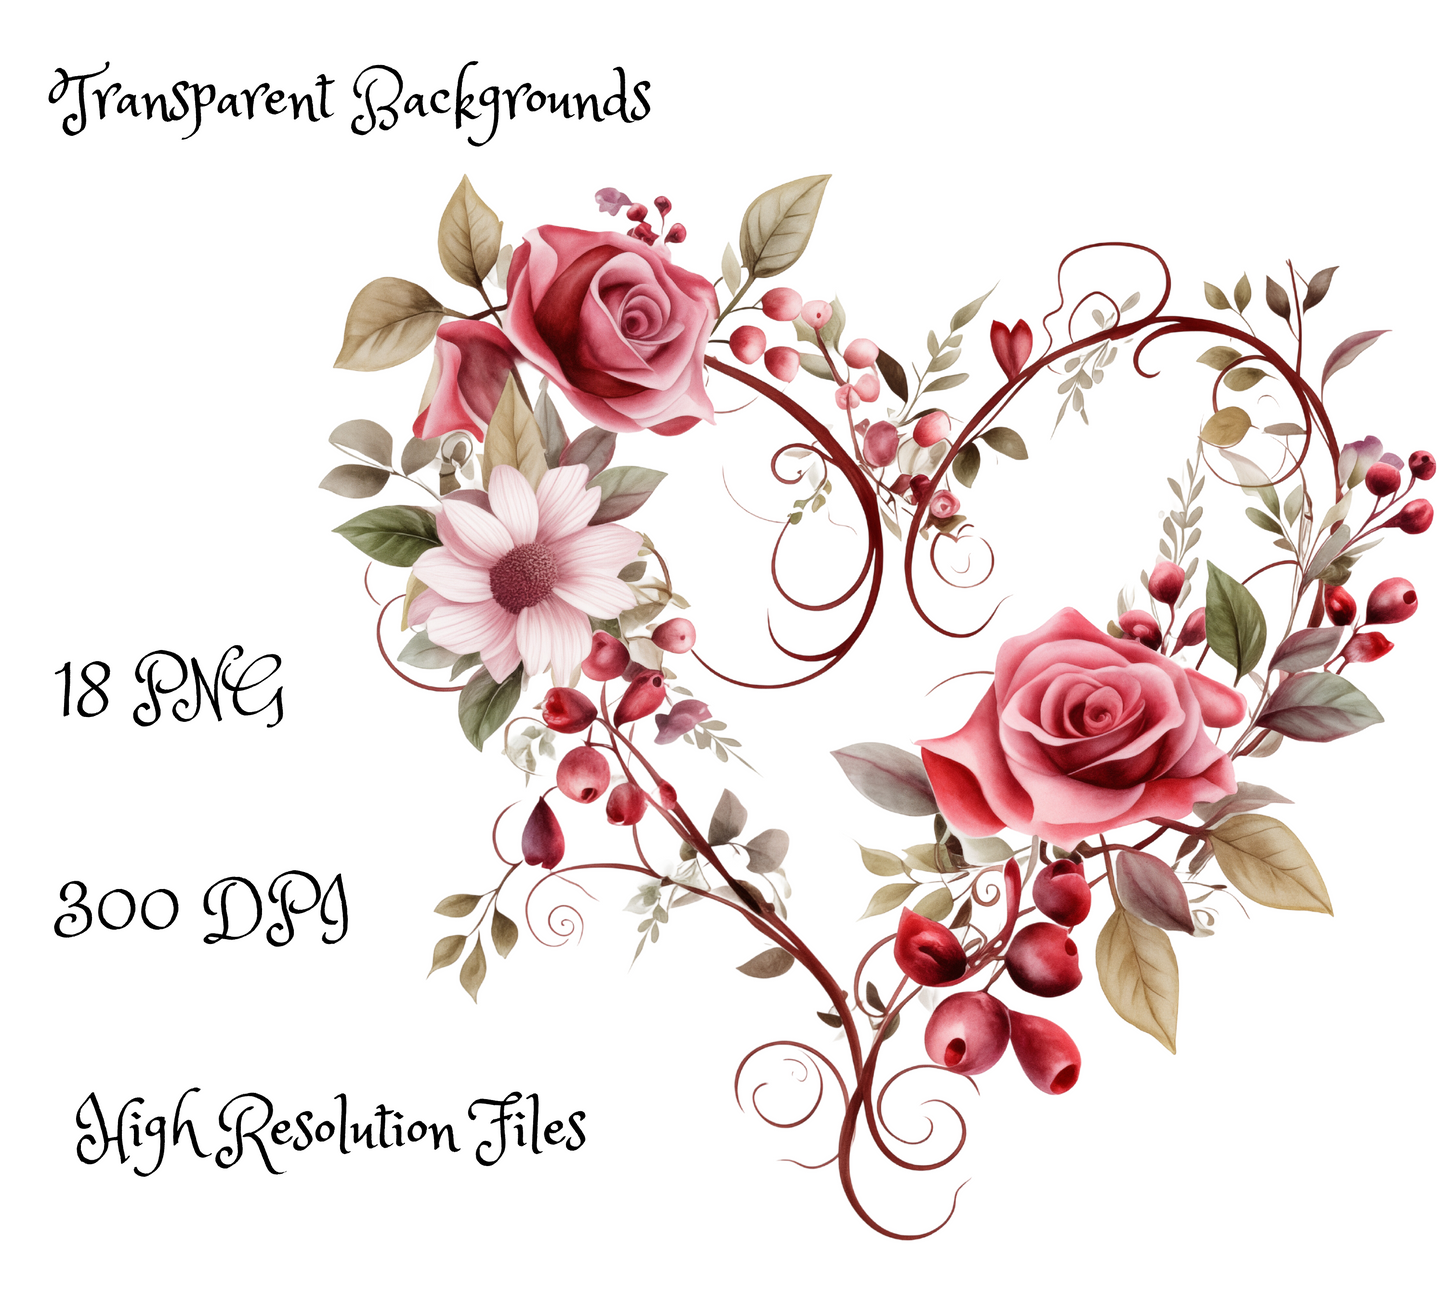 Watercolor Valentines Heart Wreath Clipart, 19 PNG Valentines Day Wildflower Clipart, Valentines Day PNG, Love Branch Wreath, Commercial Use